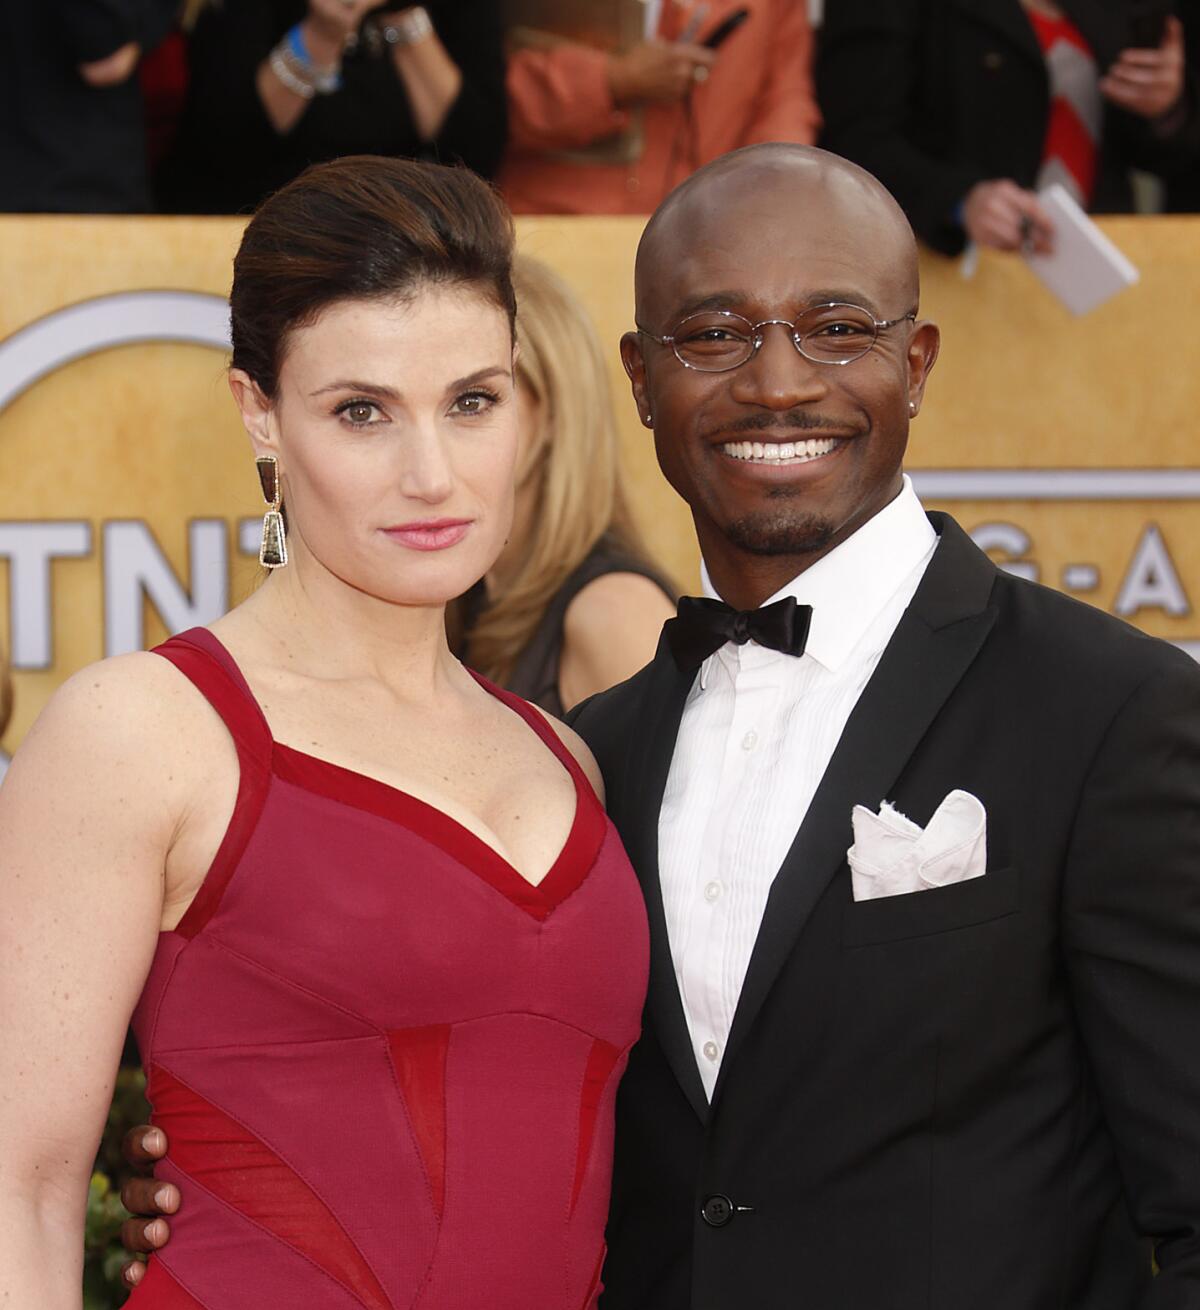 Idina Menzel wears a red dress and Taye Diggs wears a black tuxedo as the two pose for photos at a red carpet event.